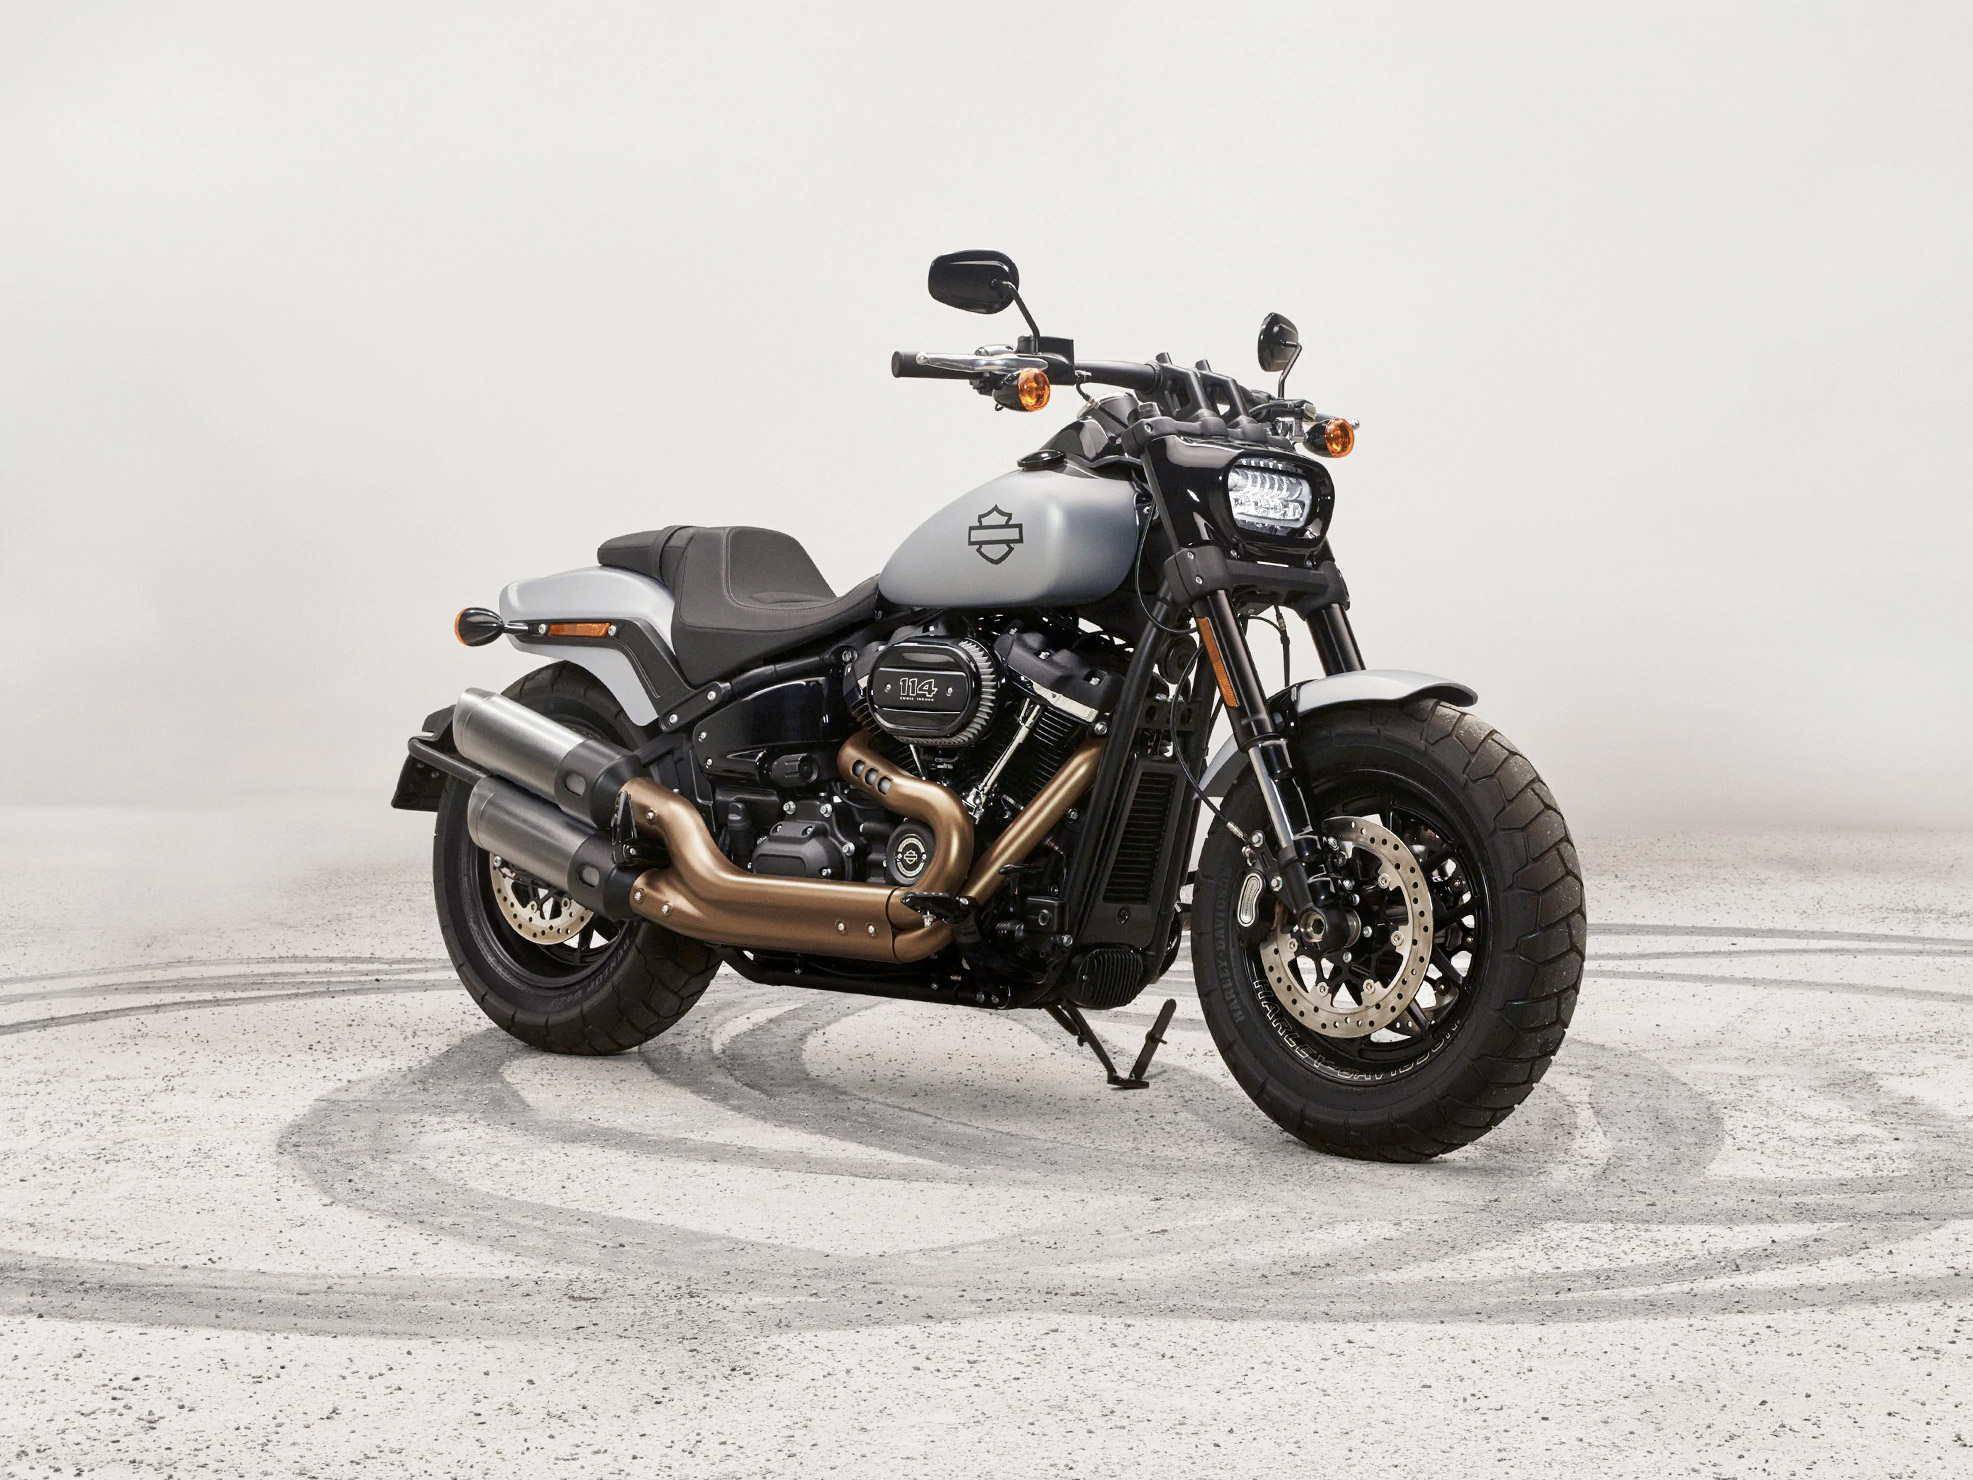 Harley-davidson fat bob vs fat boy: these are the main differences